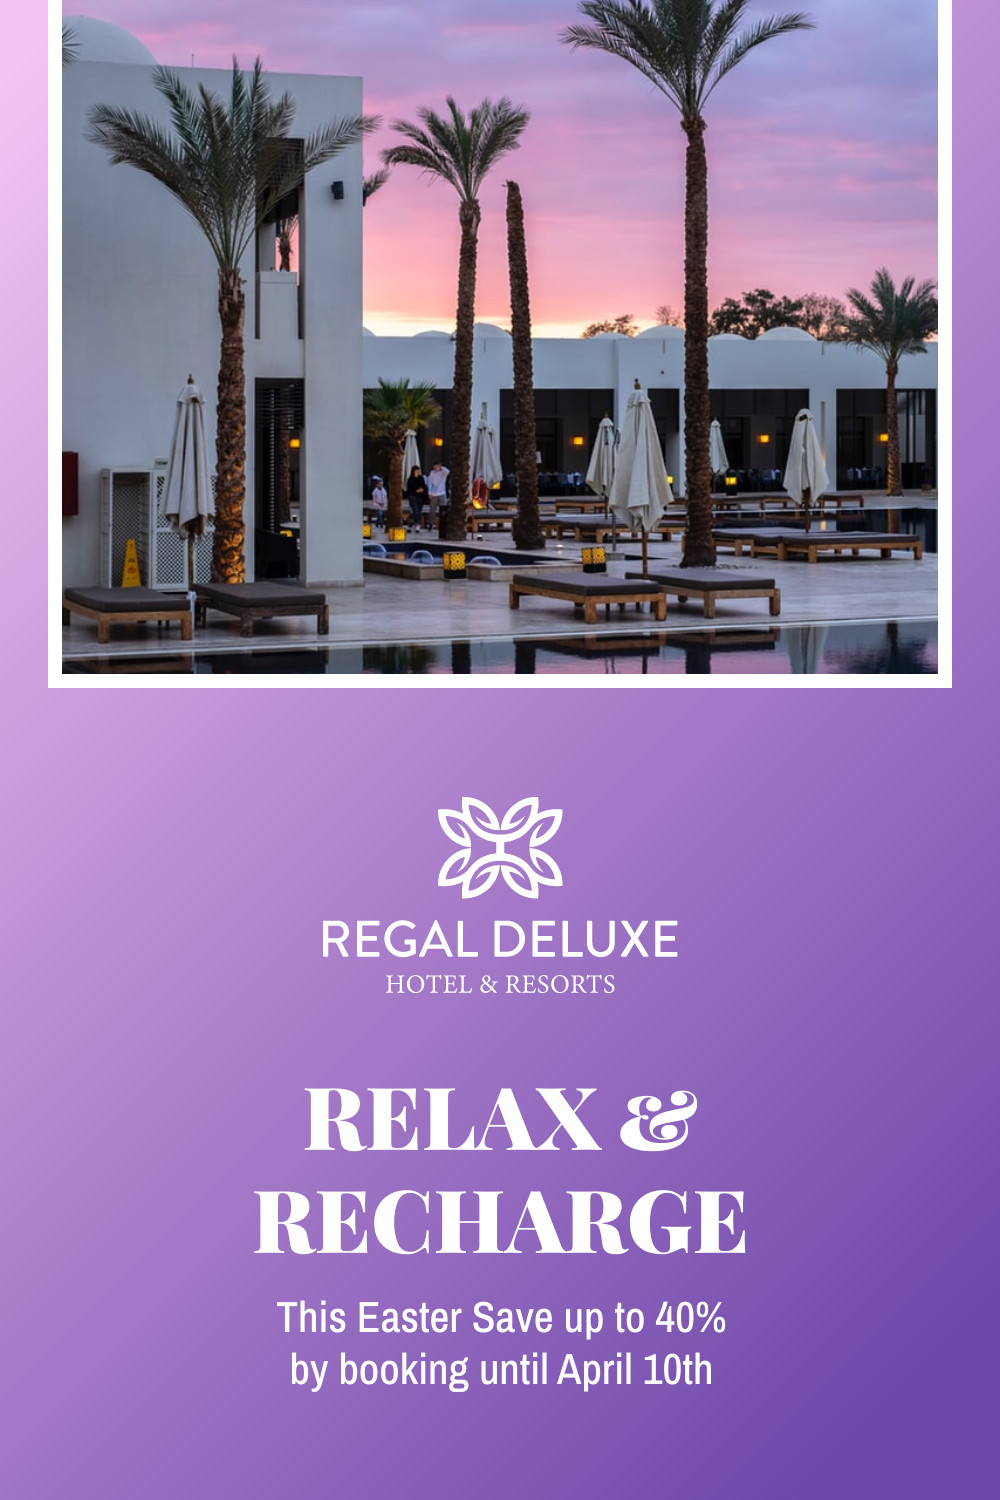 Relax and Recharge Easter Hotel Offer